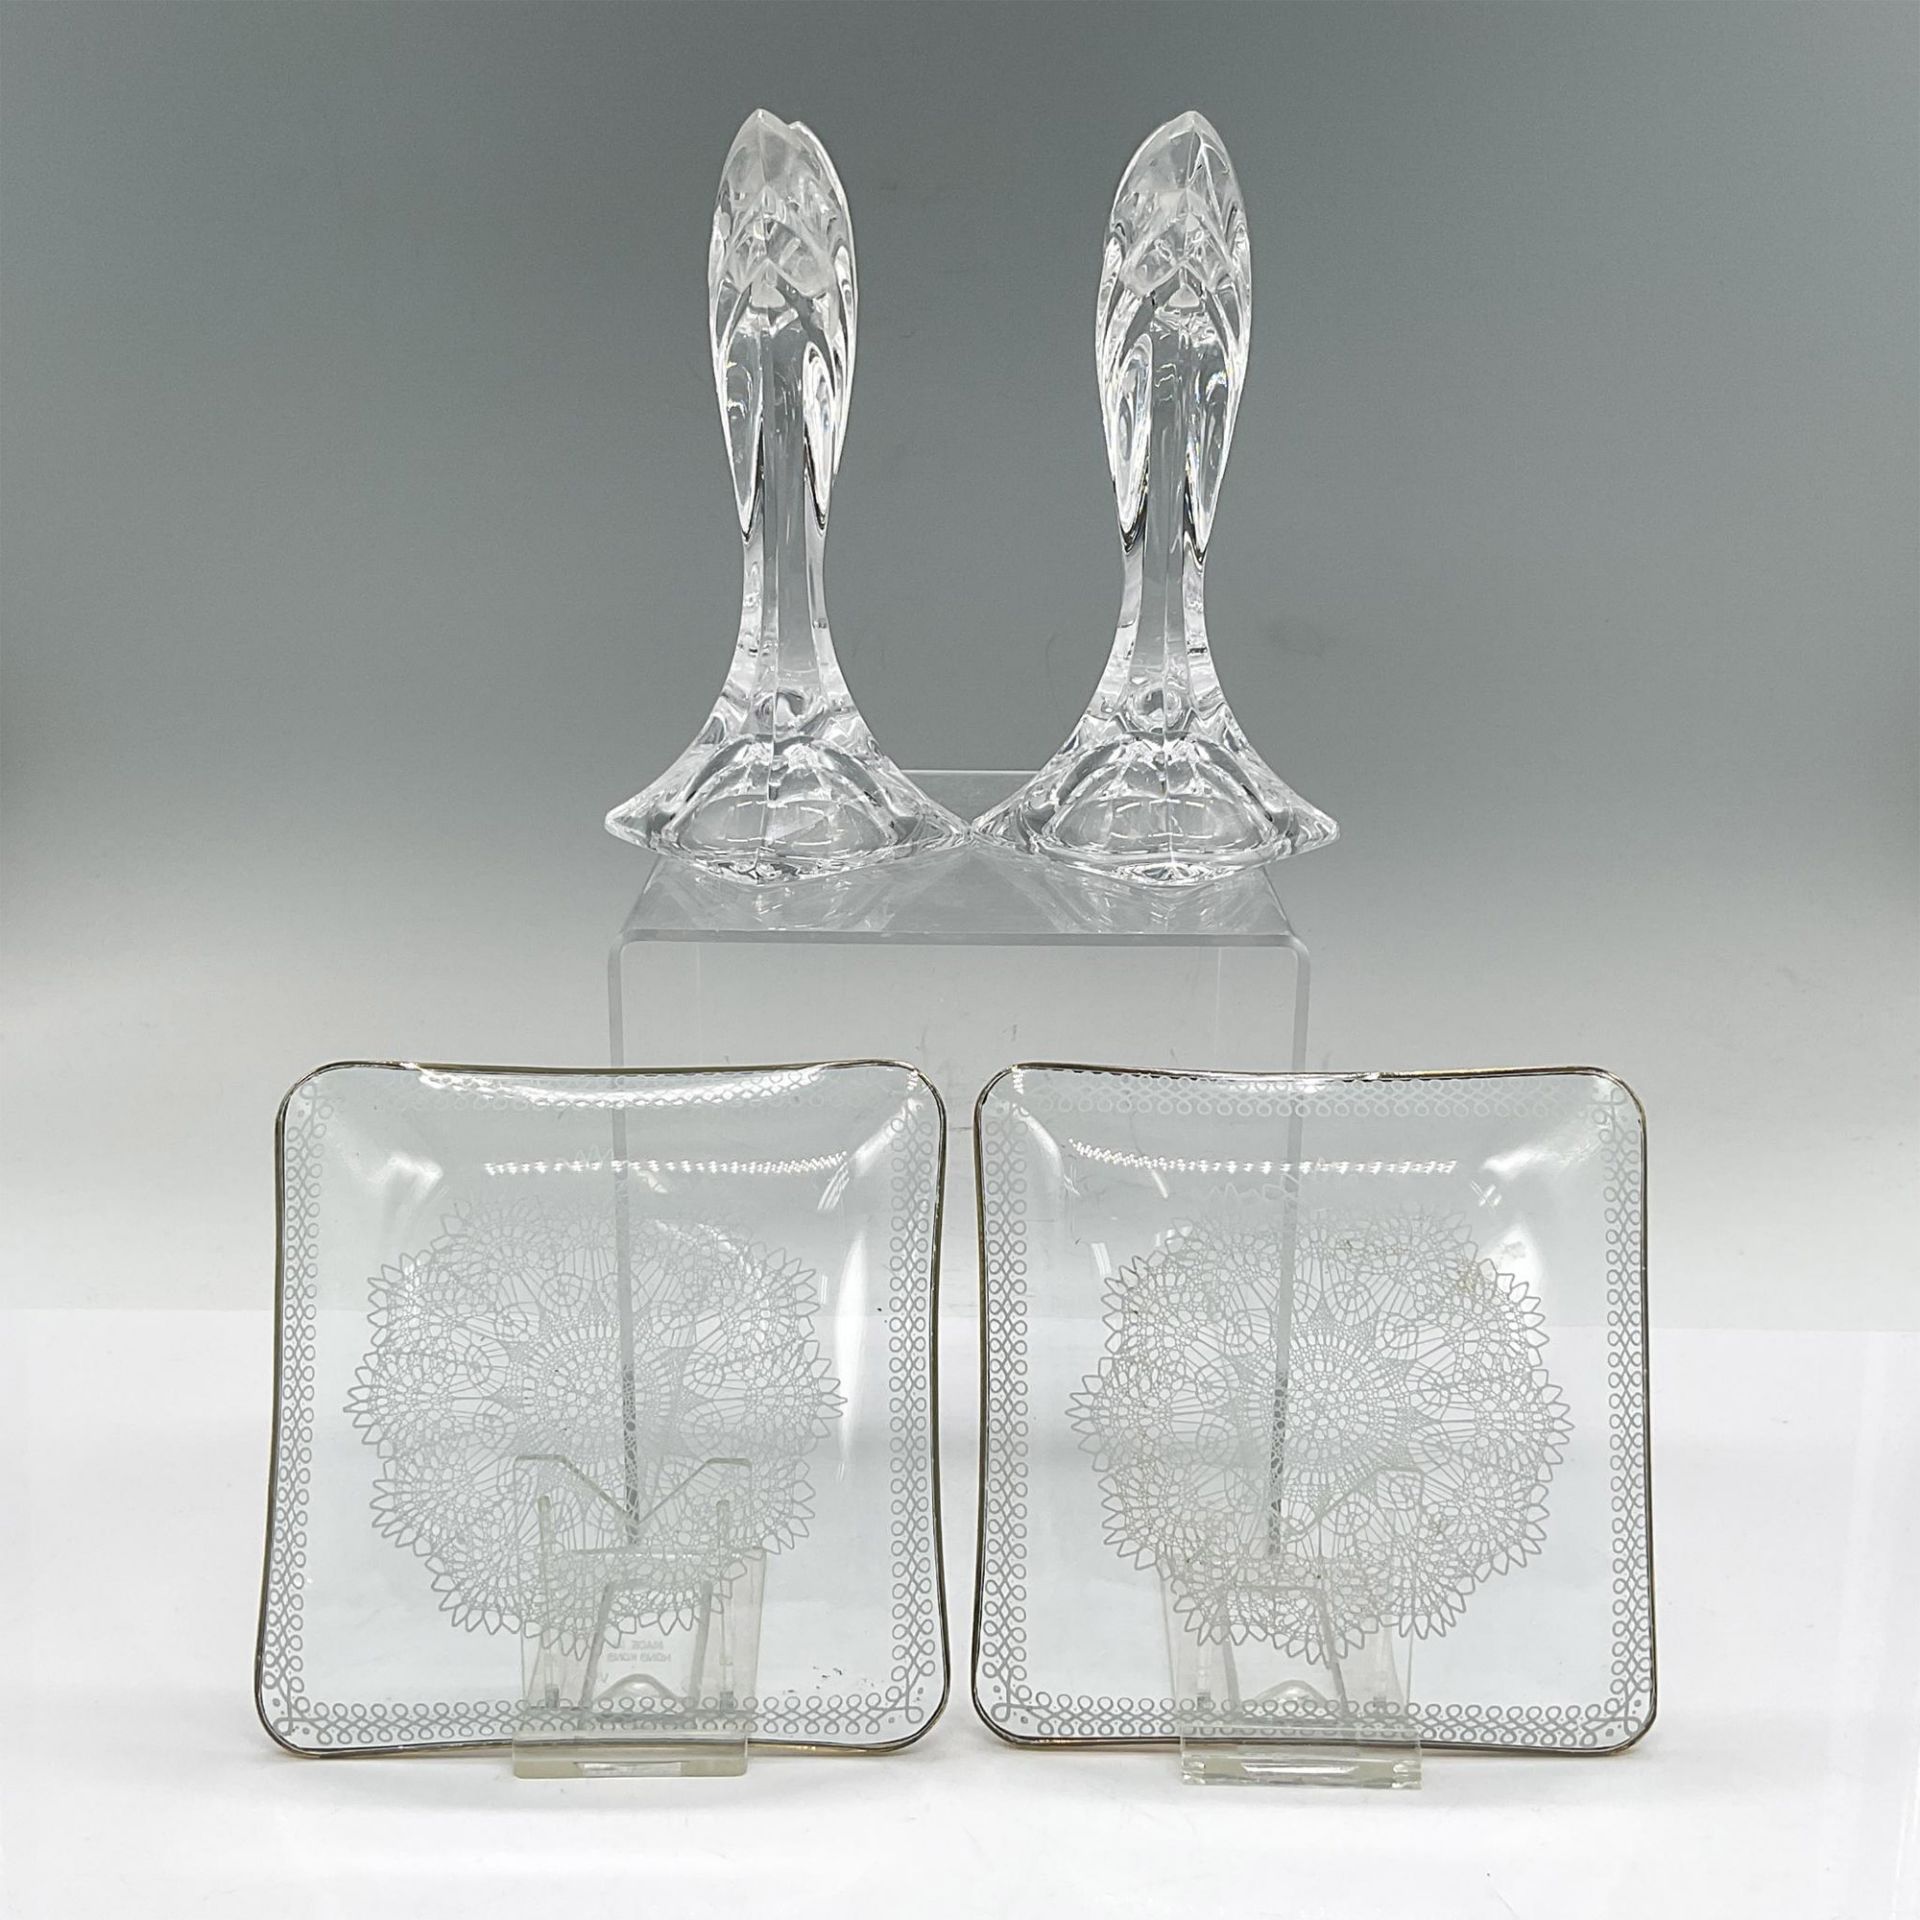 4pc Decorative Glass Candlesticks and Small Dishes - Image 2 of 3